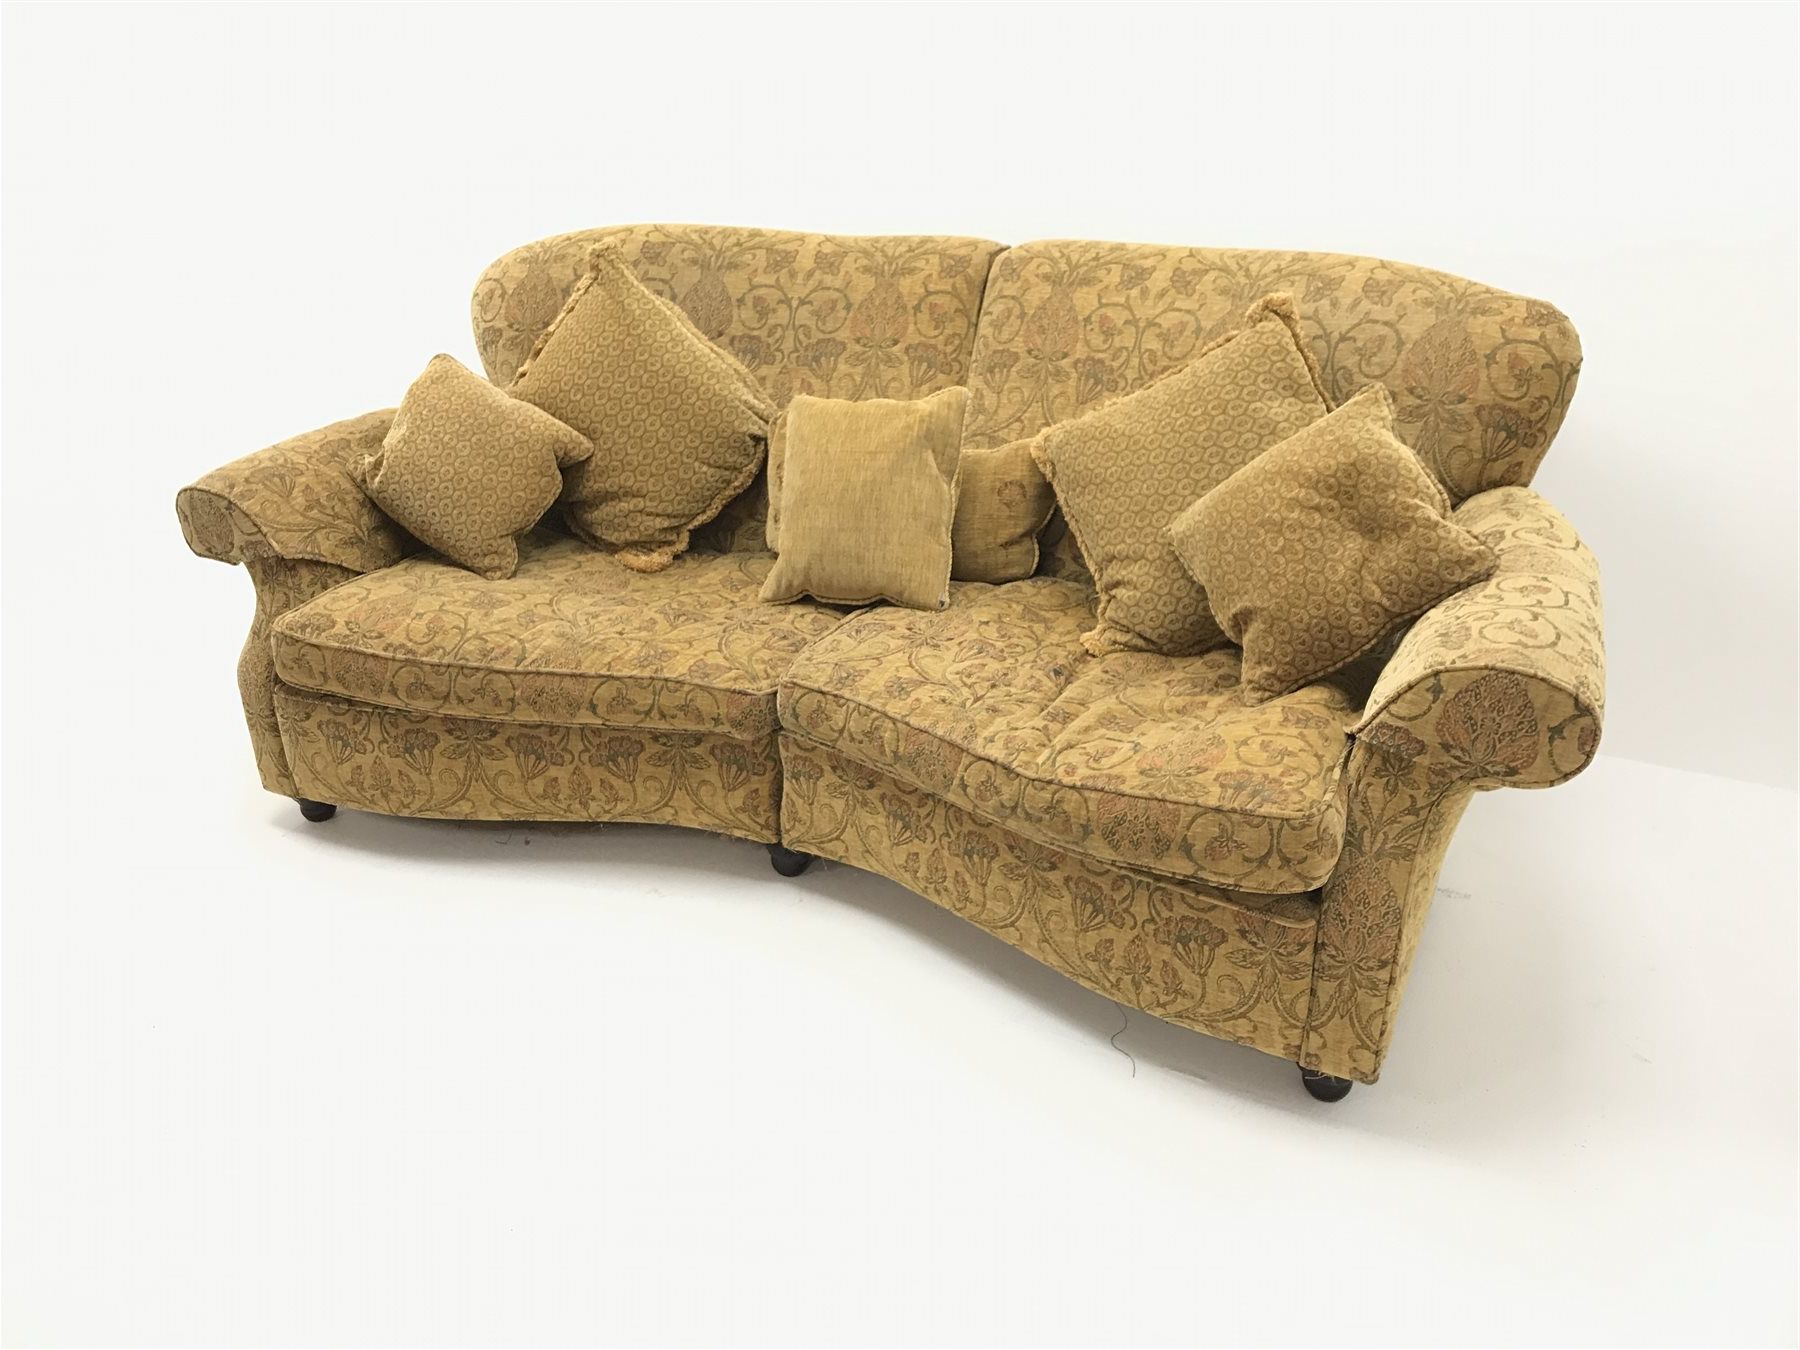 Recent Three Seat Curved Traditional Sofa, Scrolled Arms, Upholstered In A Within Sofas With Curved Arms (View 7 of 15)